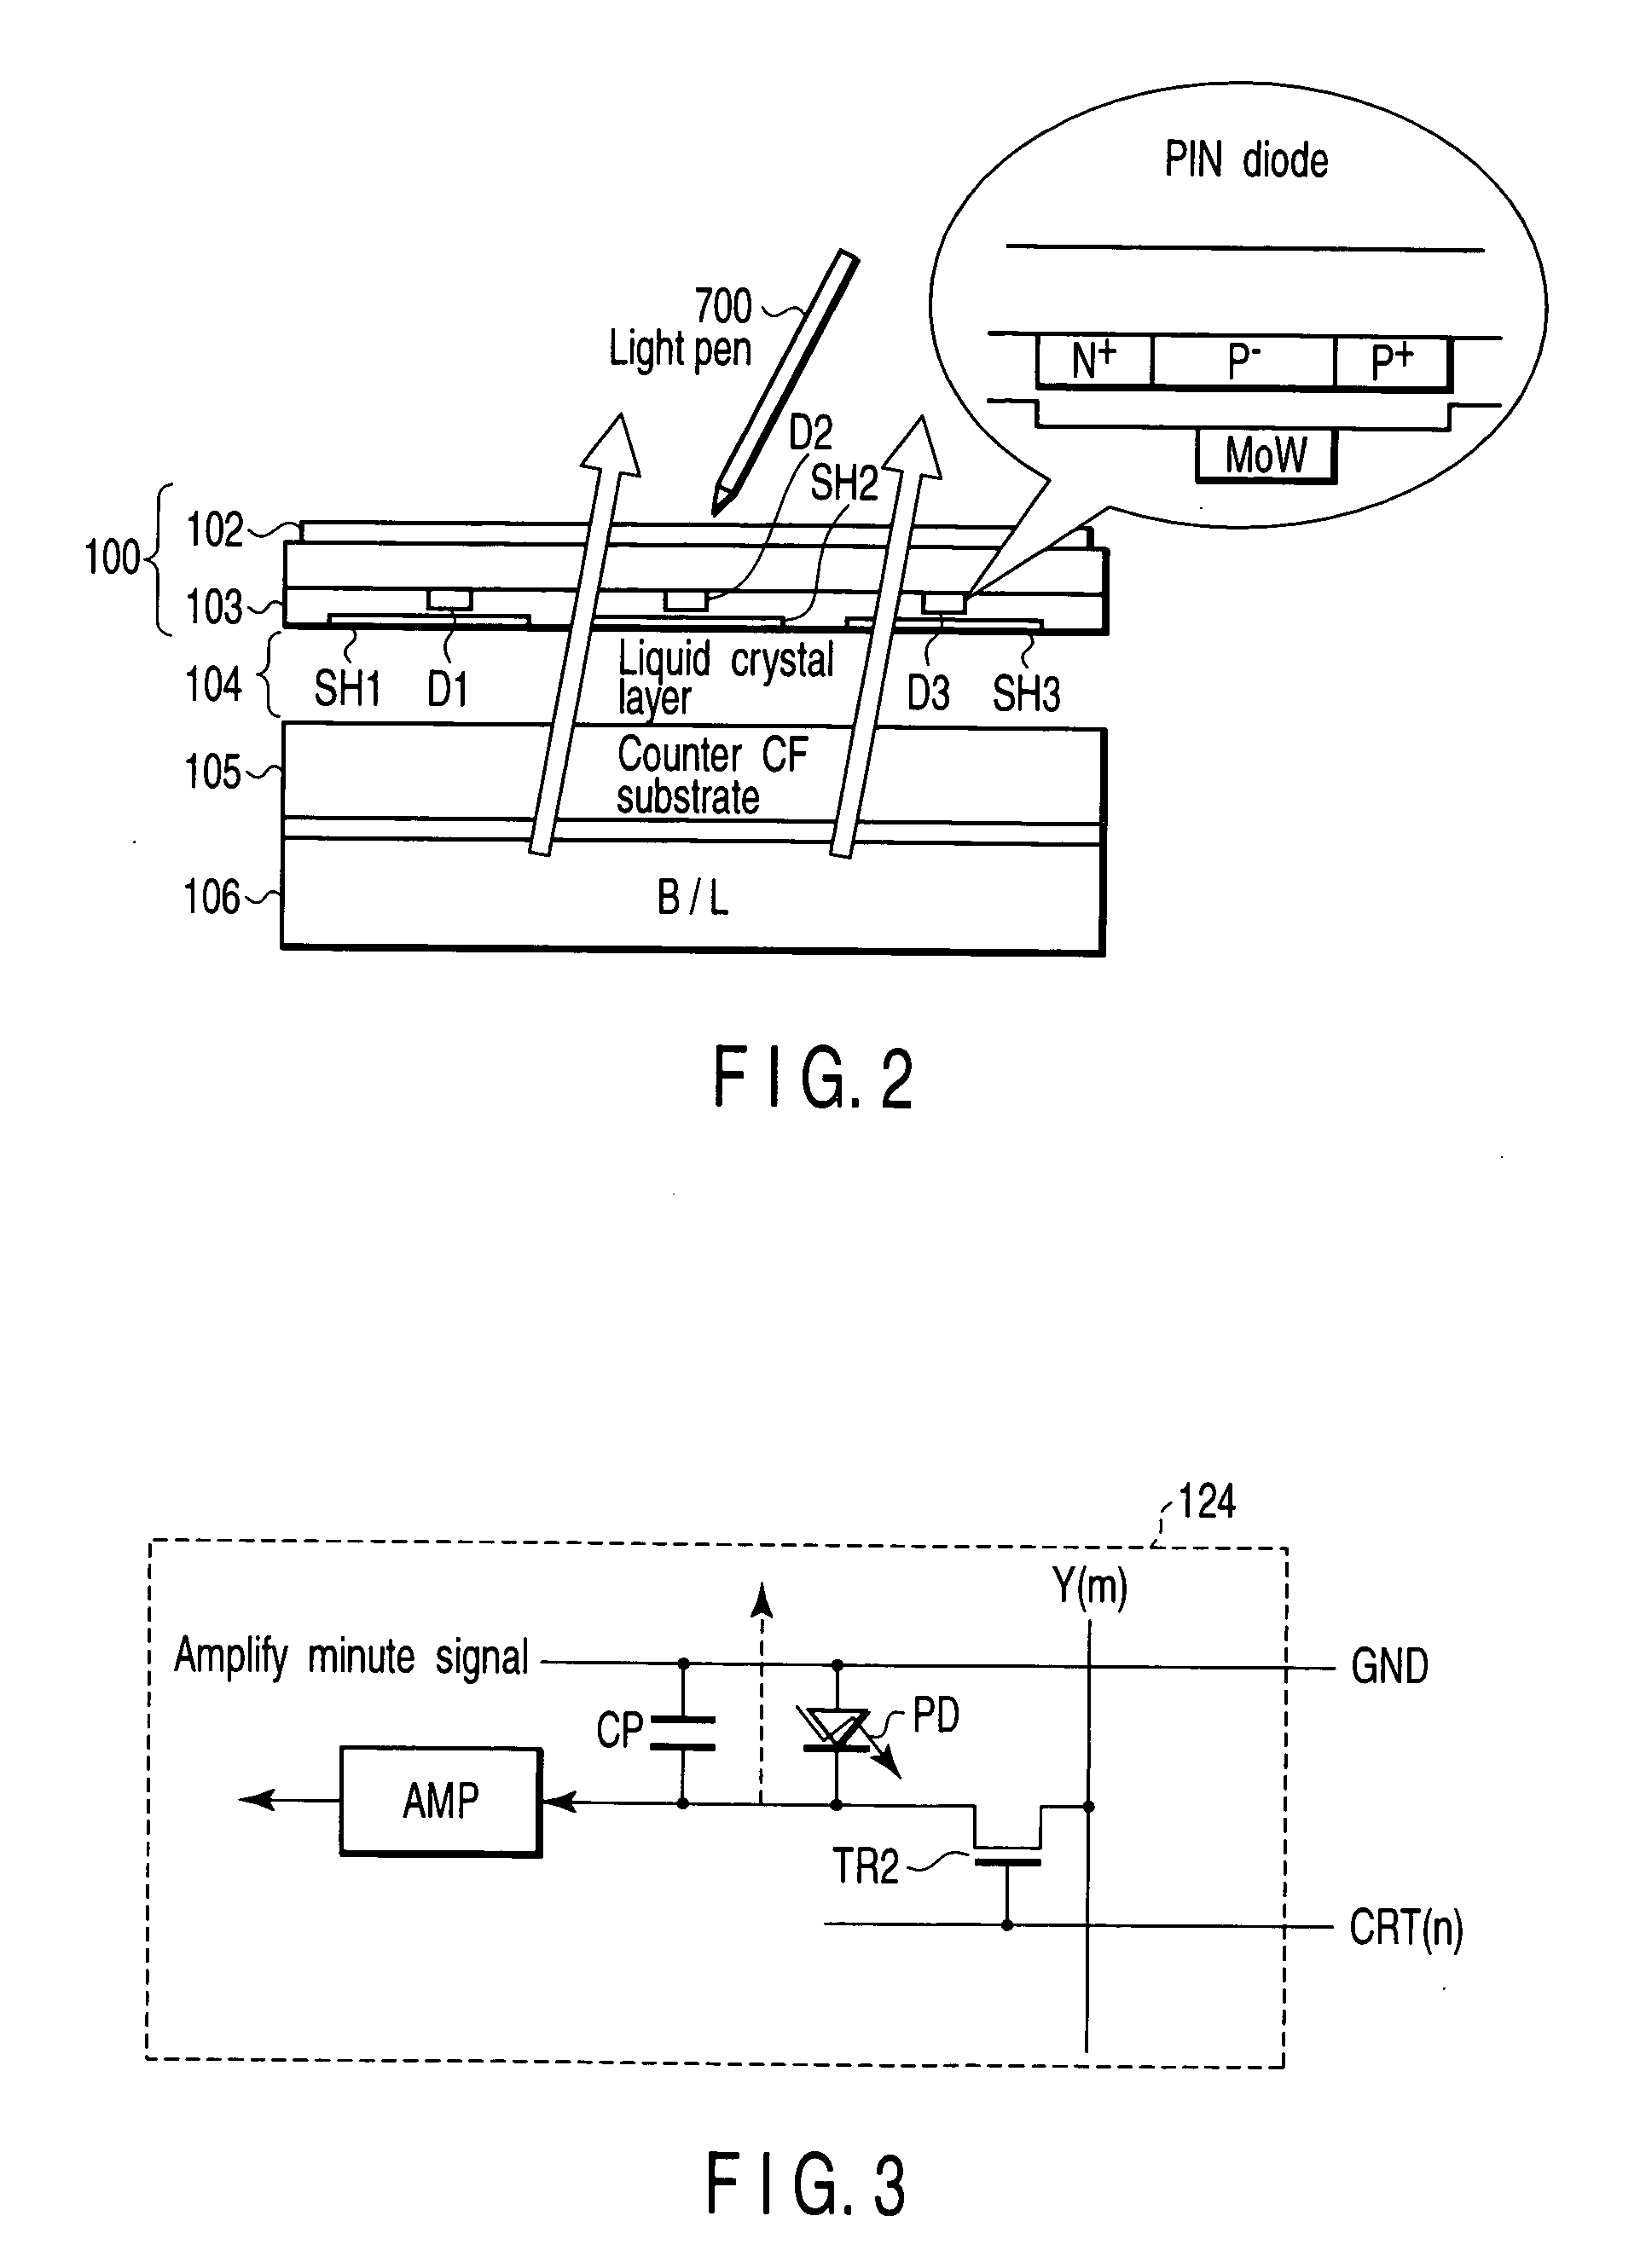 Display device with optical input function